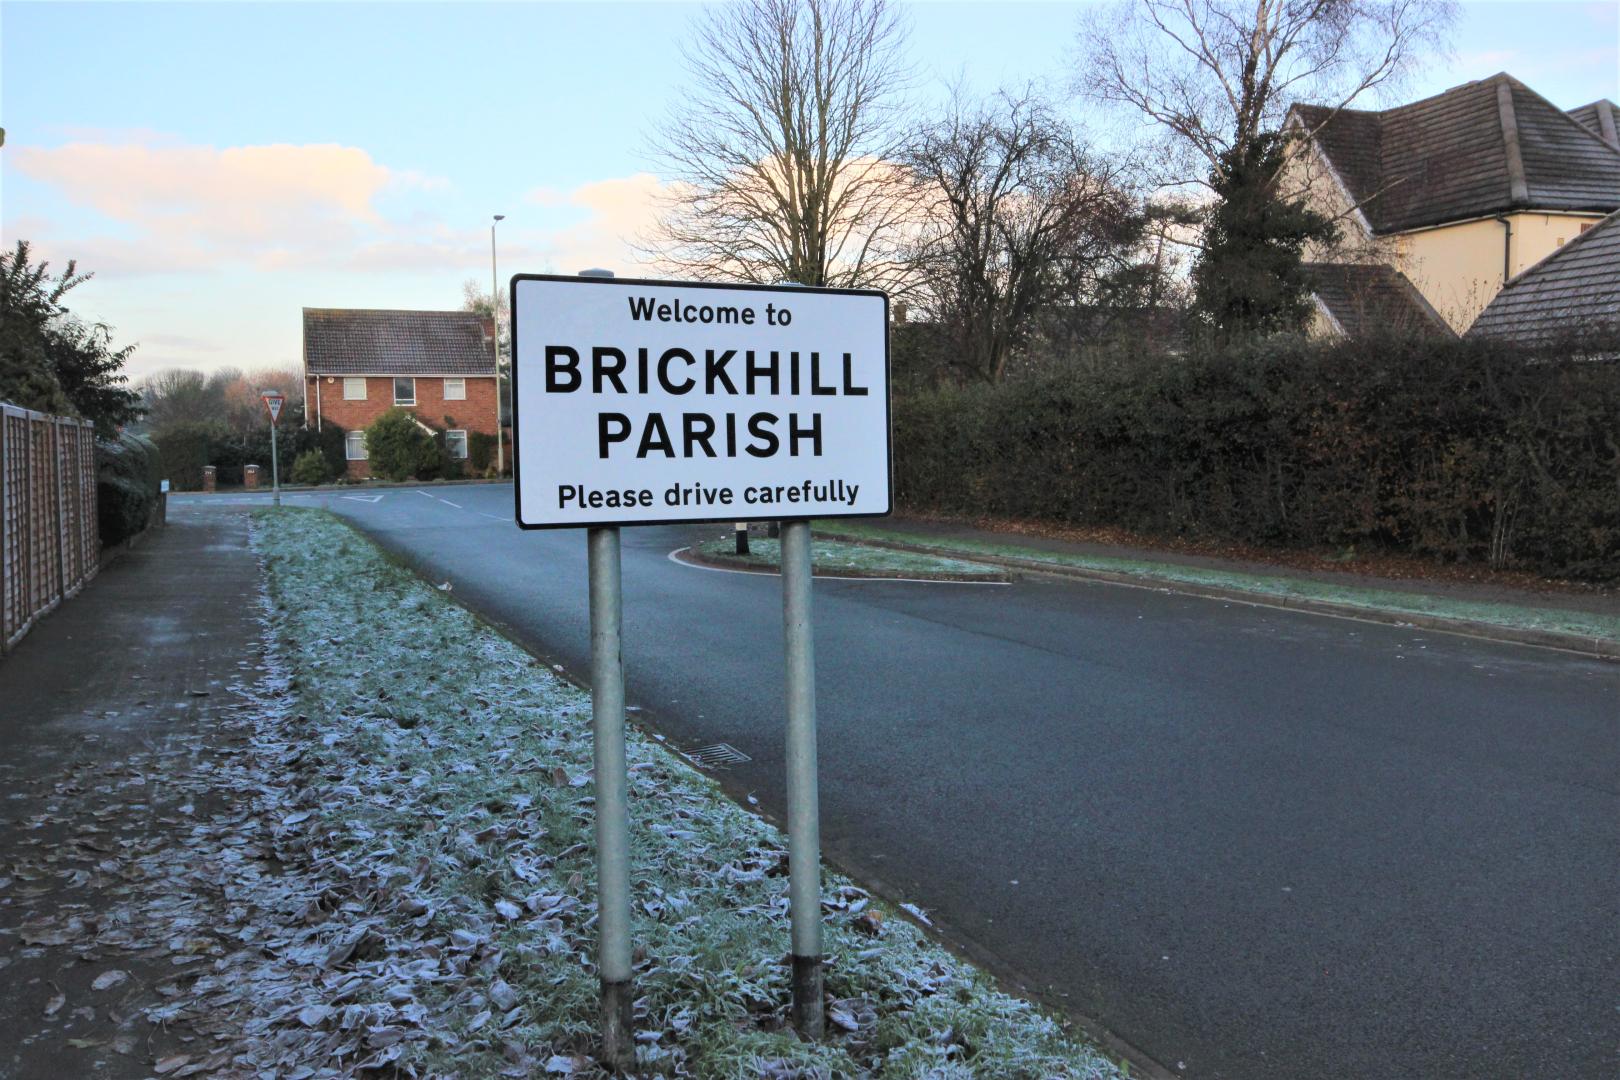 Area Guides for Brickhill (1)